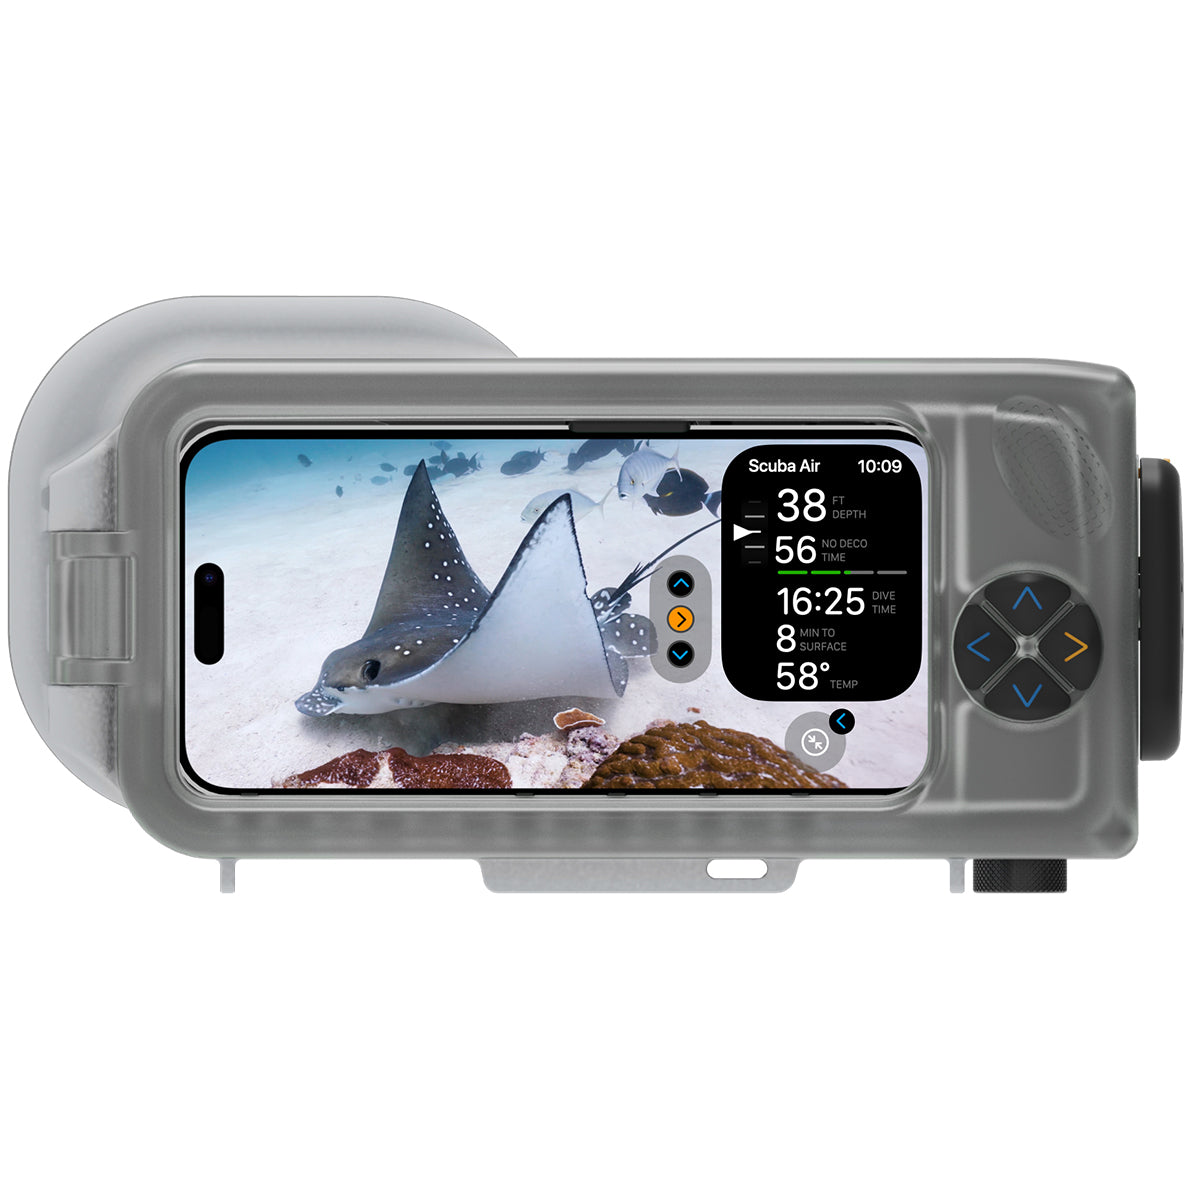 Oceanic Apple Plus Dive Computer and Iphone Housing